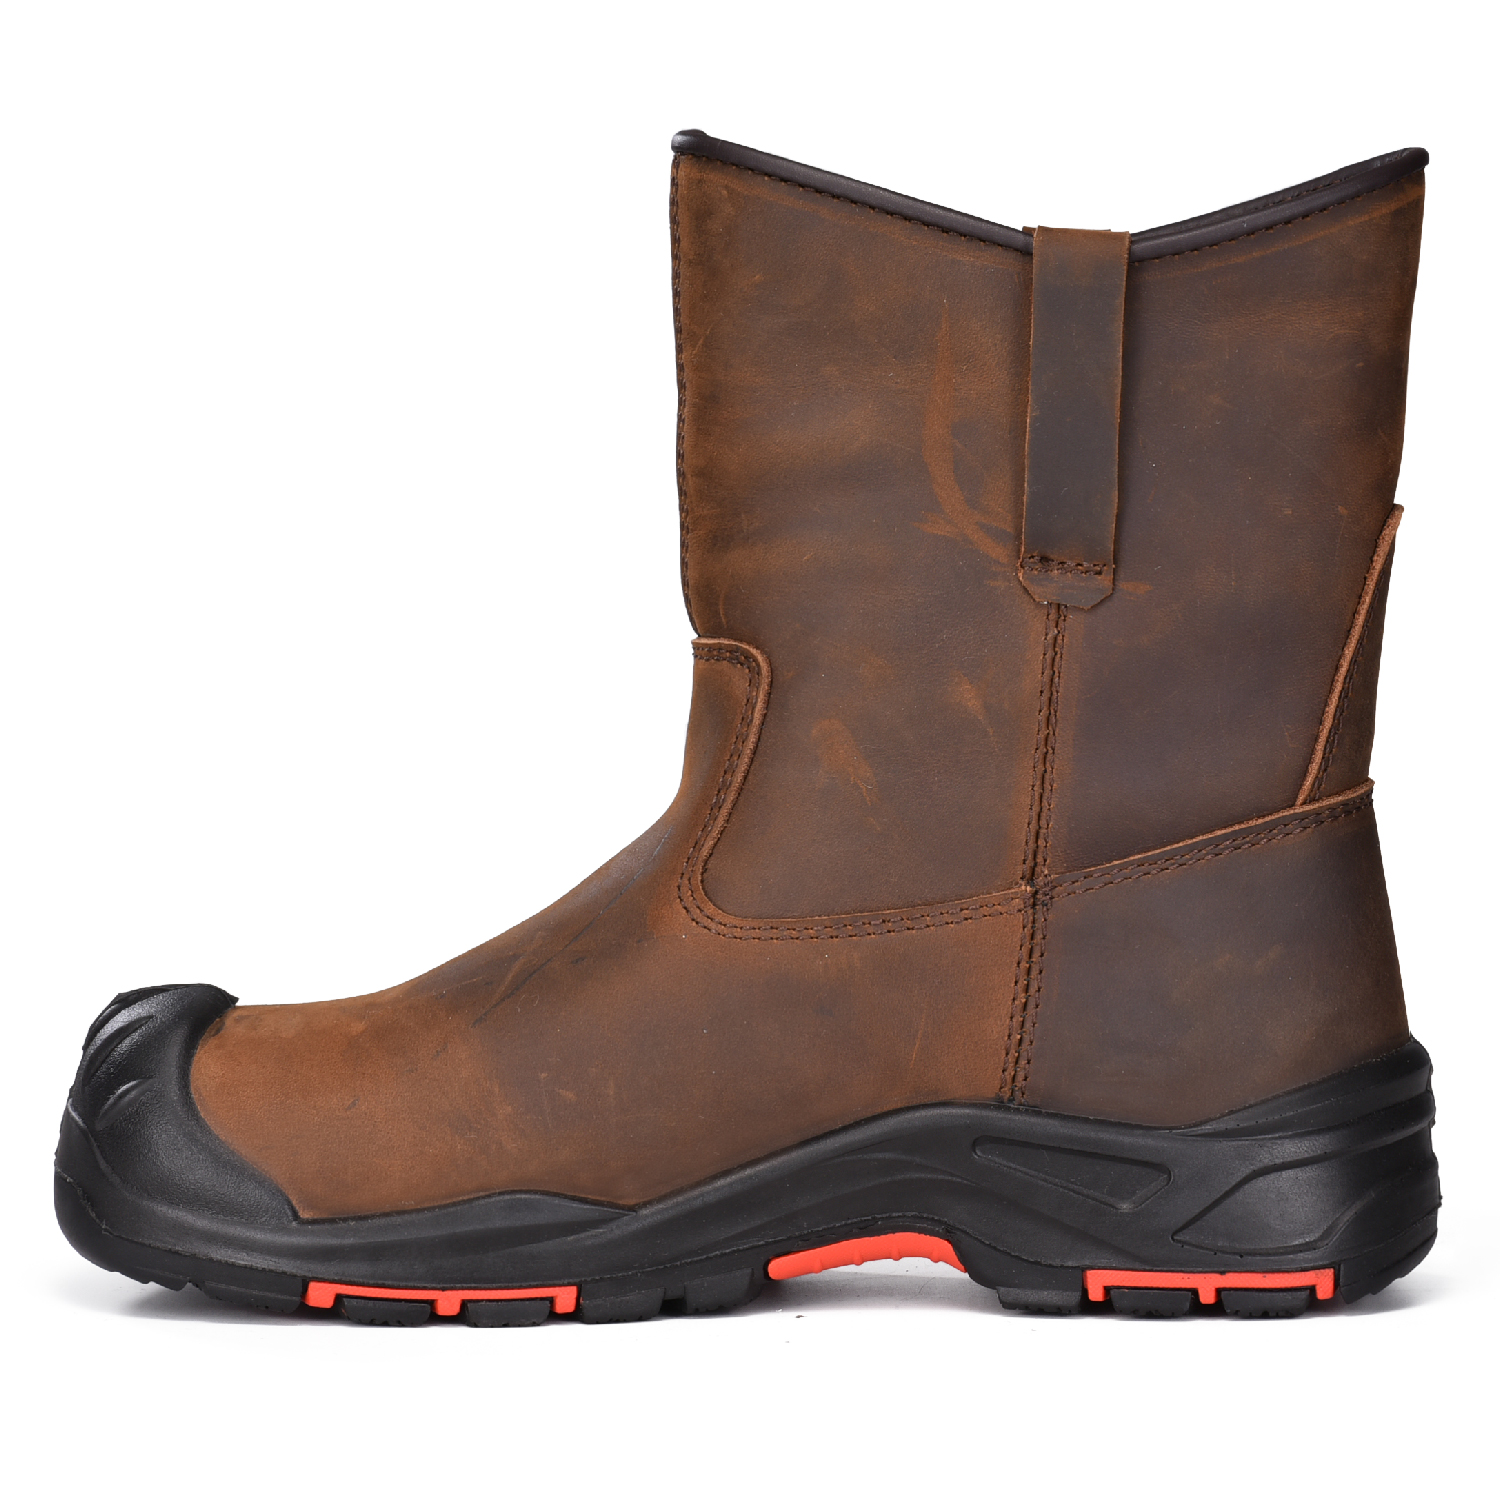 CE EN 20345 S3 Certificated Safety Boots Oil And Gas Resistant H-9441 Short